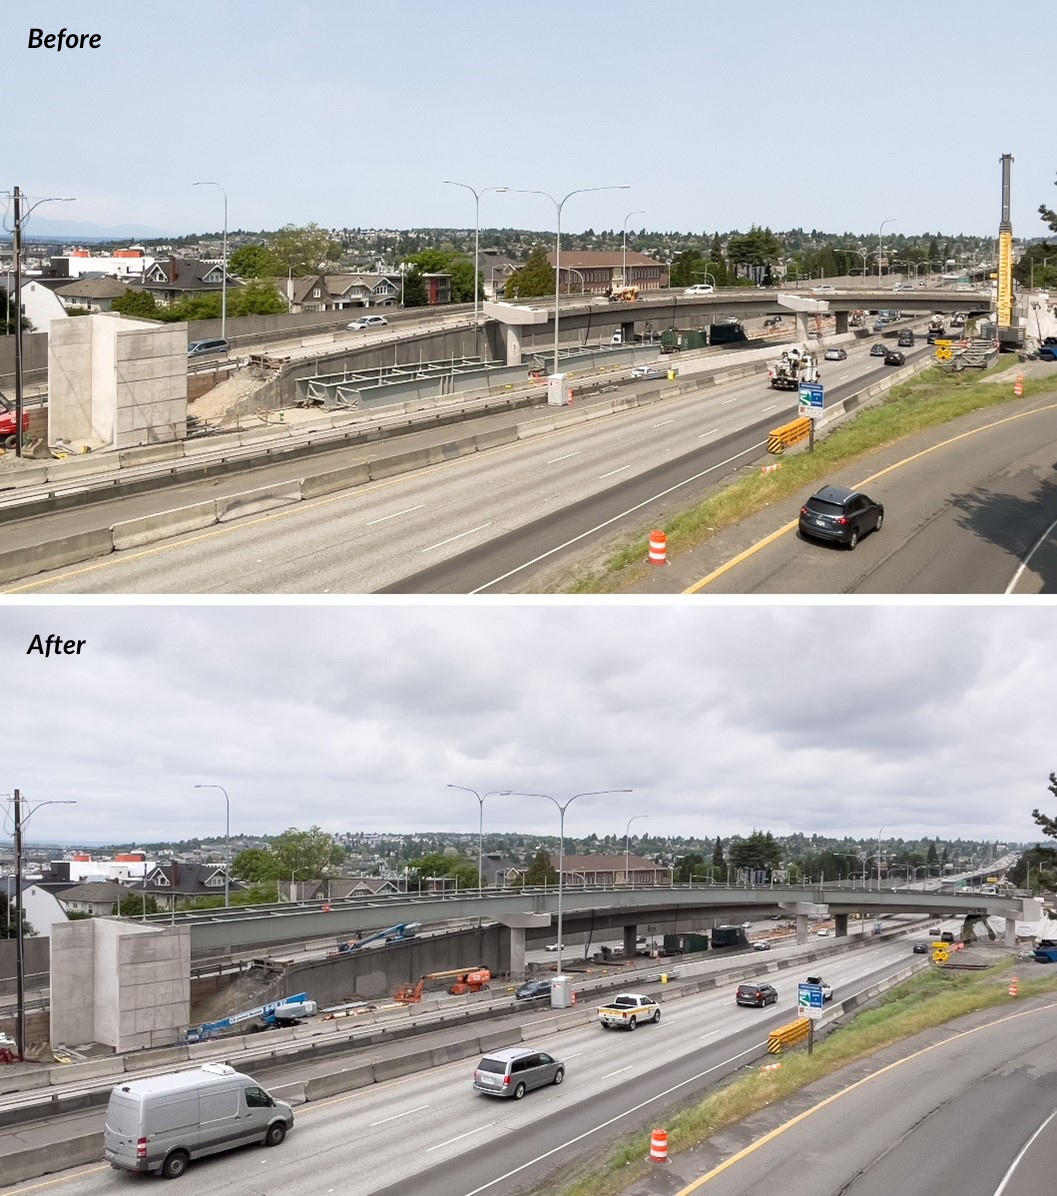 Photo shows before and after when crews used cranes to lift and assemble girders in before placing on concrete piers and crossbeams.